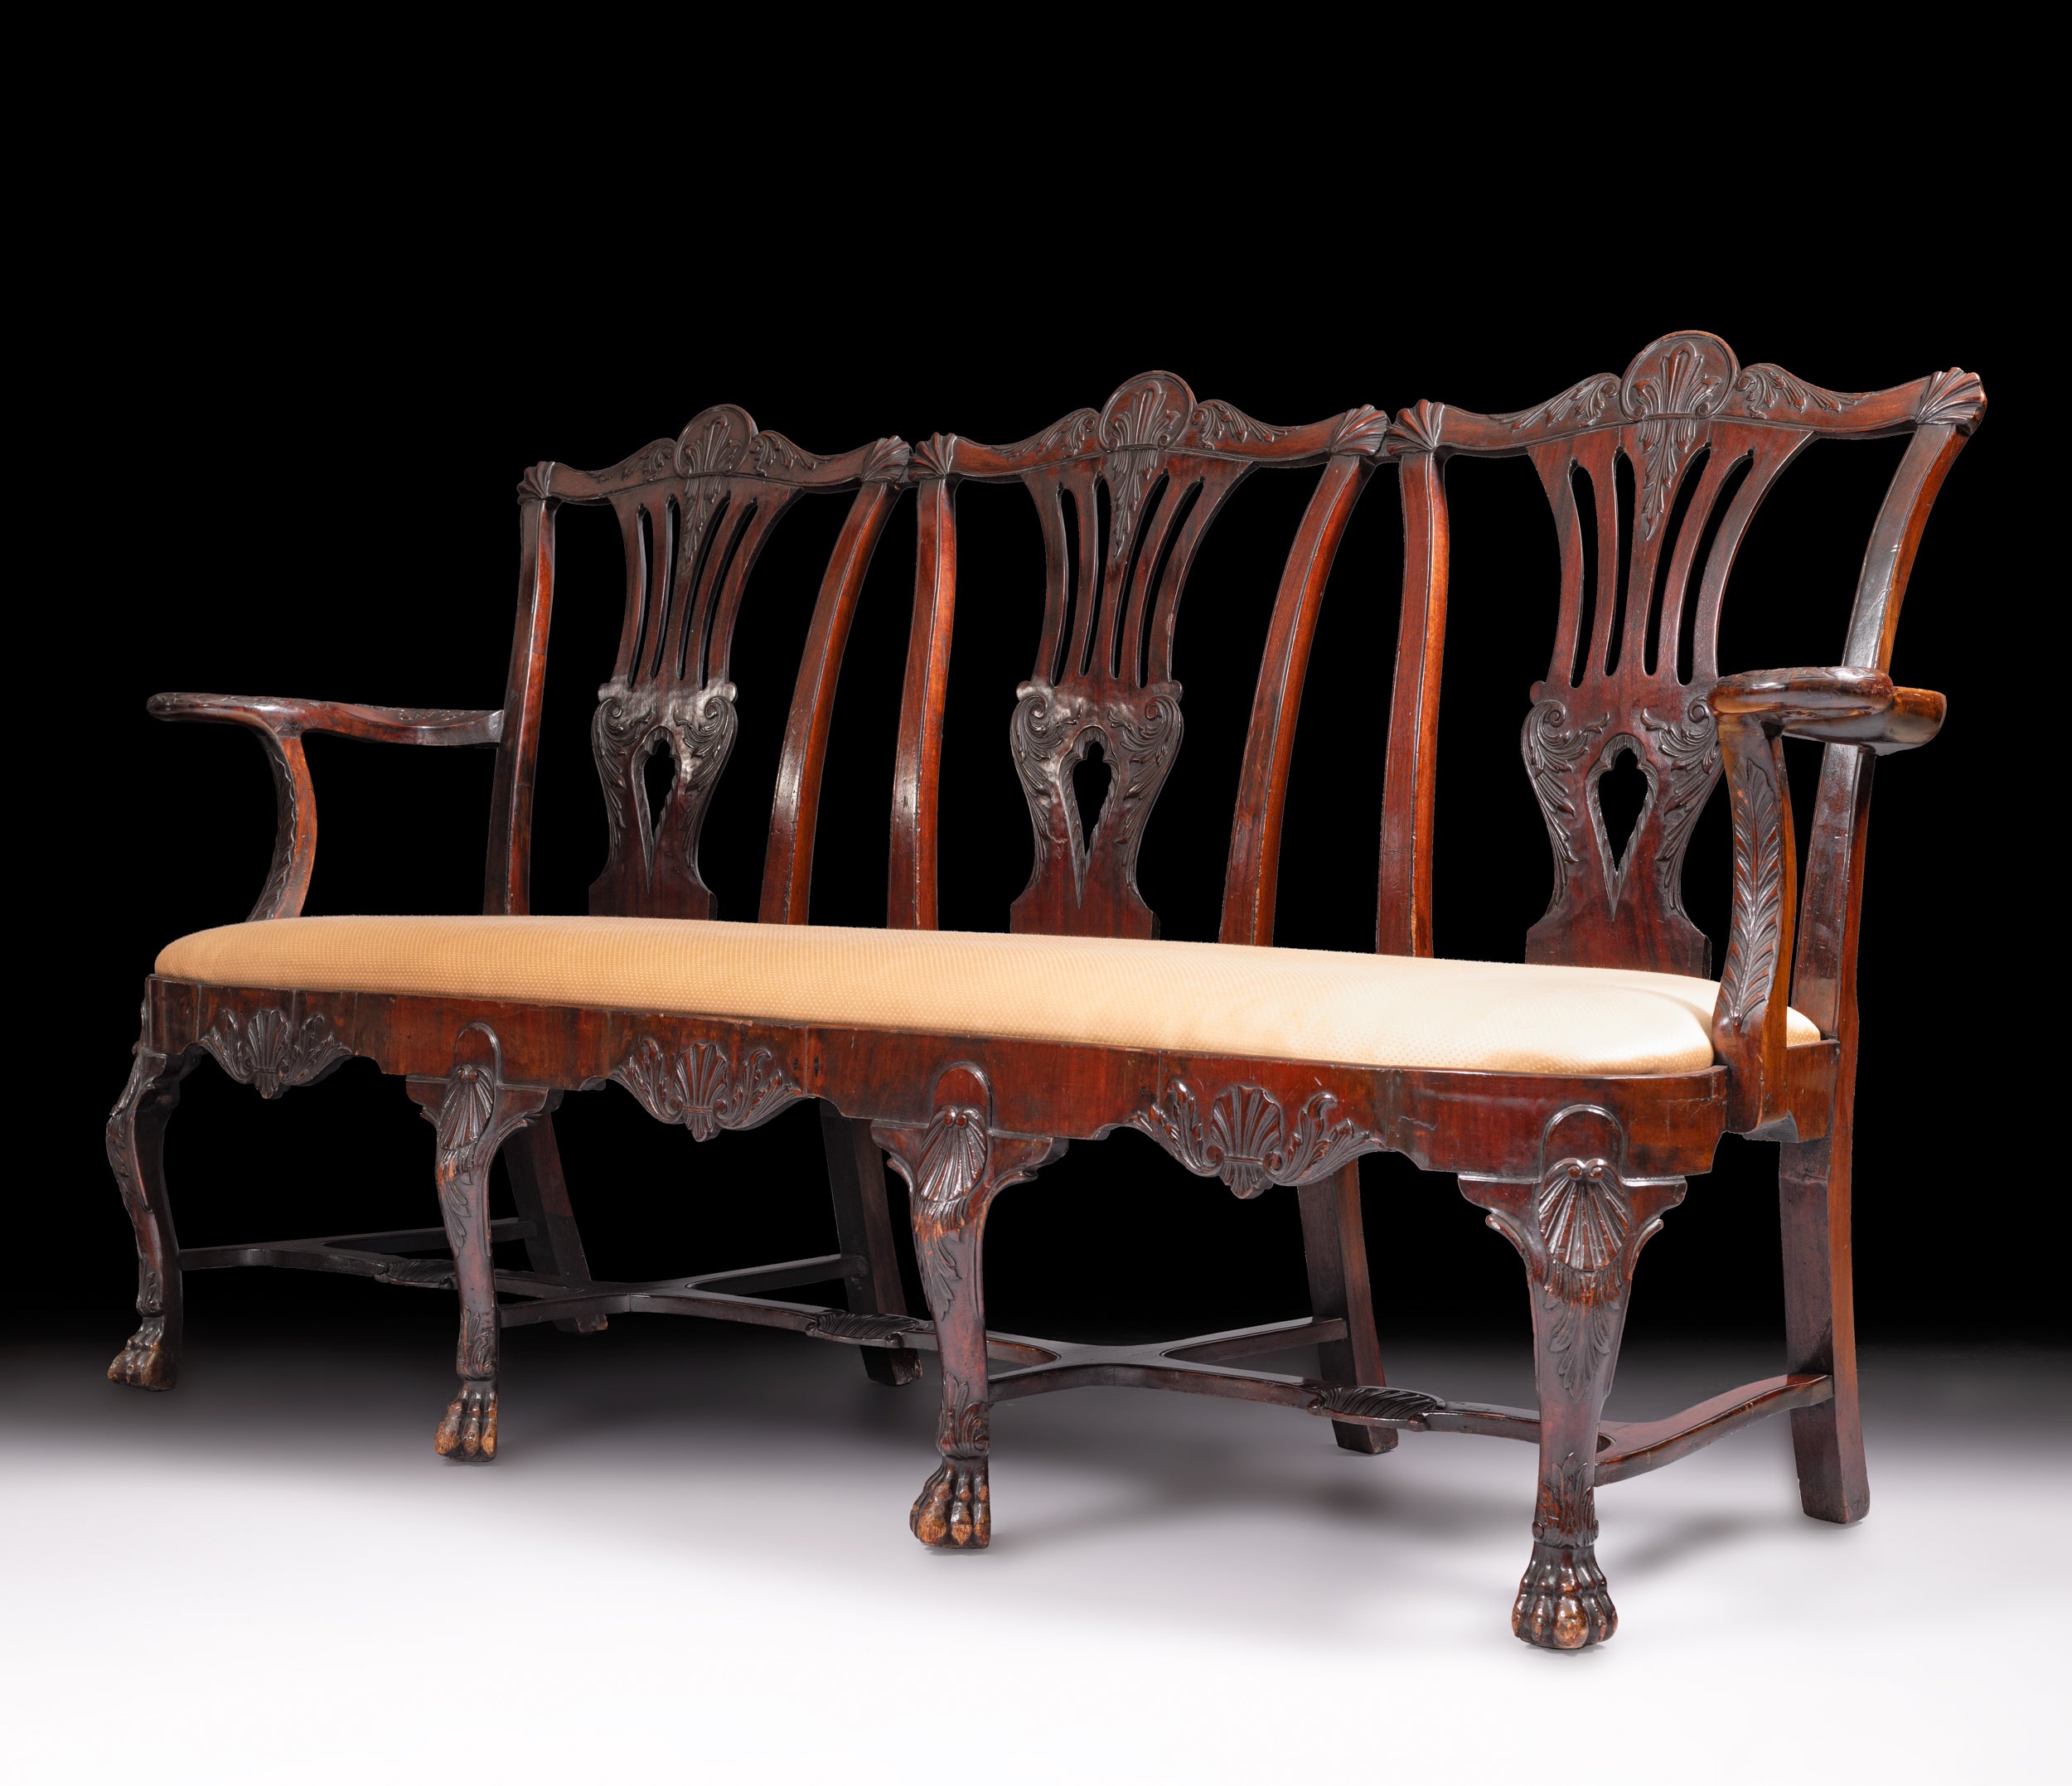 19TH CENTURY SETTEE BY BUTLER OF DUBLIN - REF No. 8006